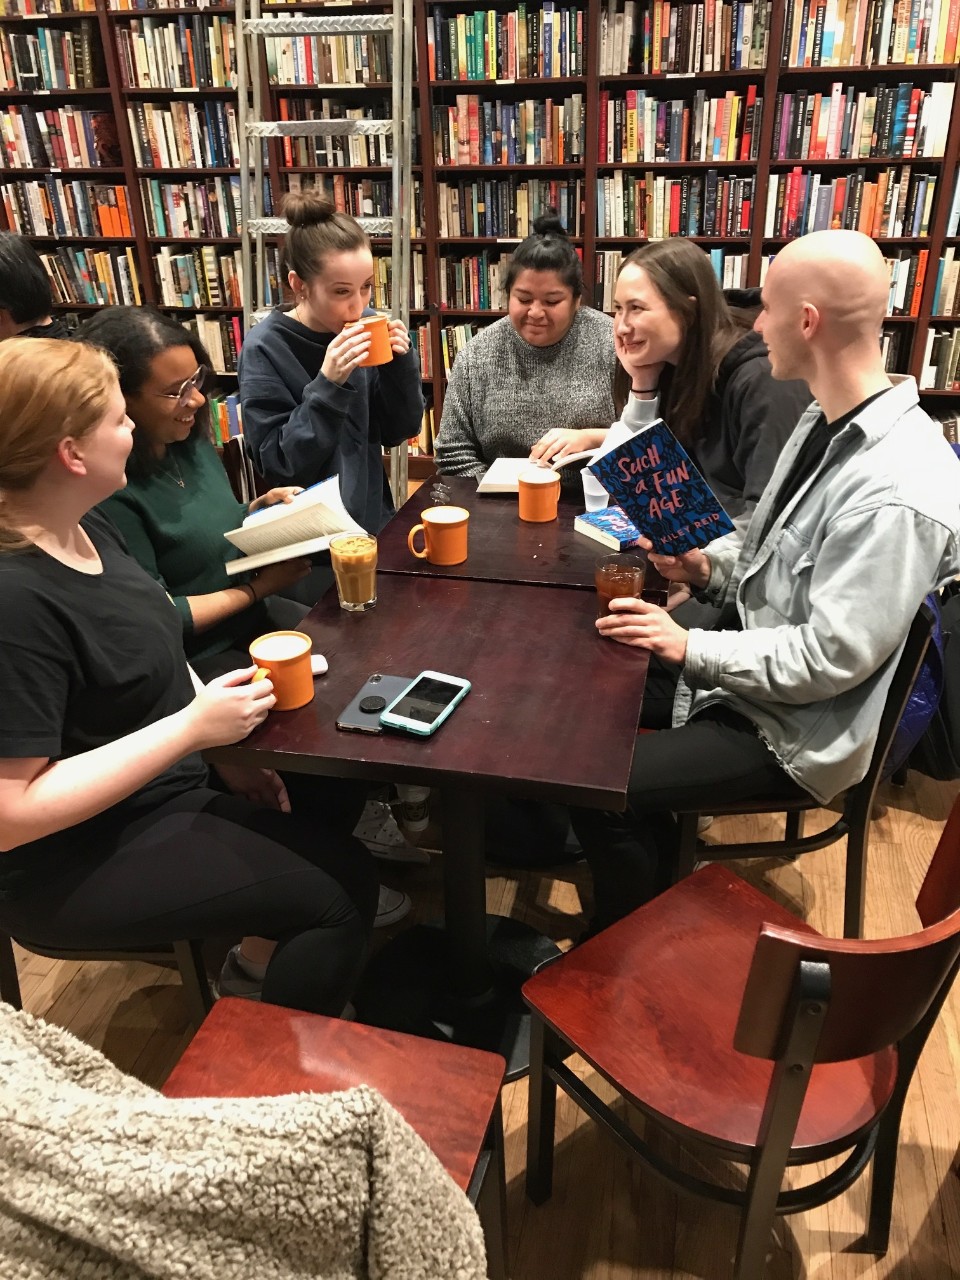 PSA members sit around a table while talking and holding books and beverages in a room filled with bookcases